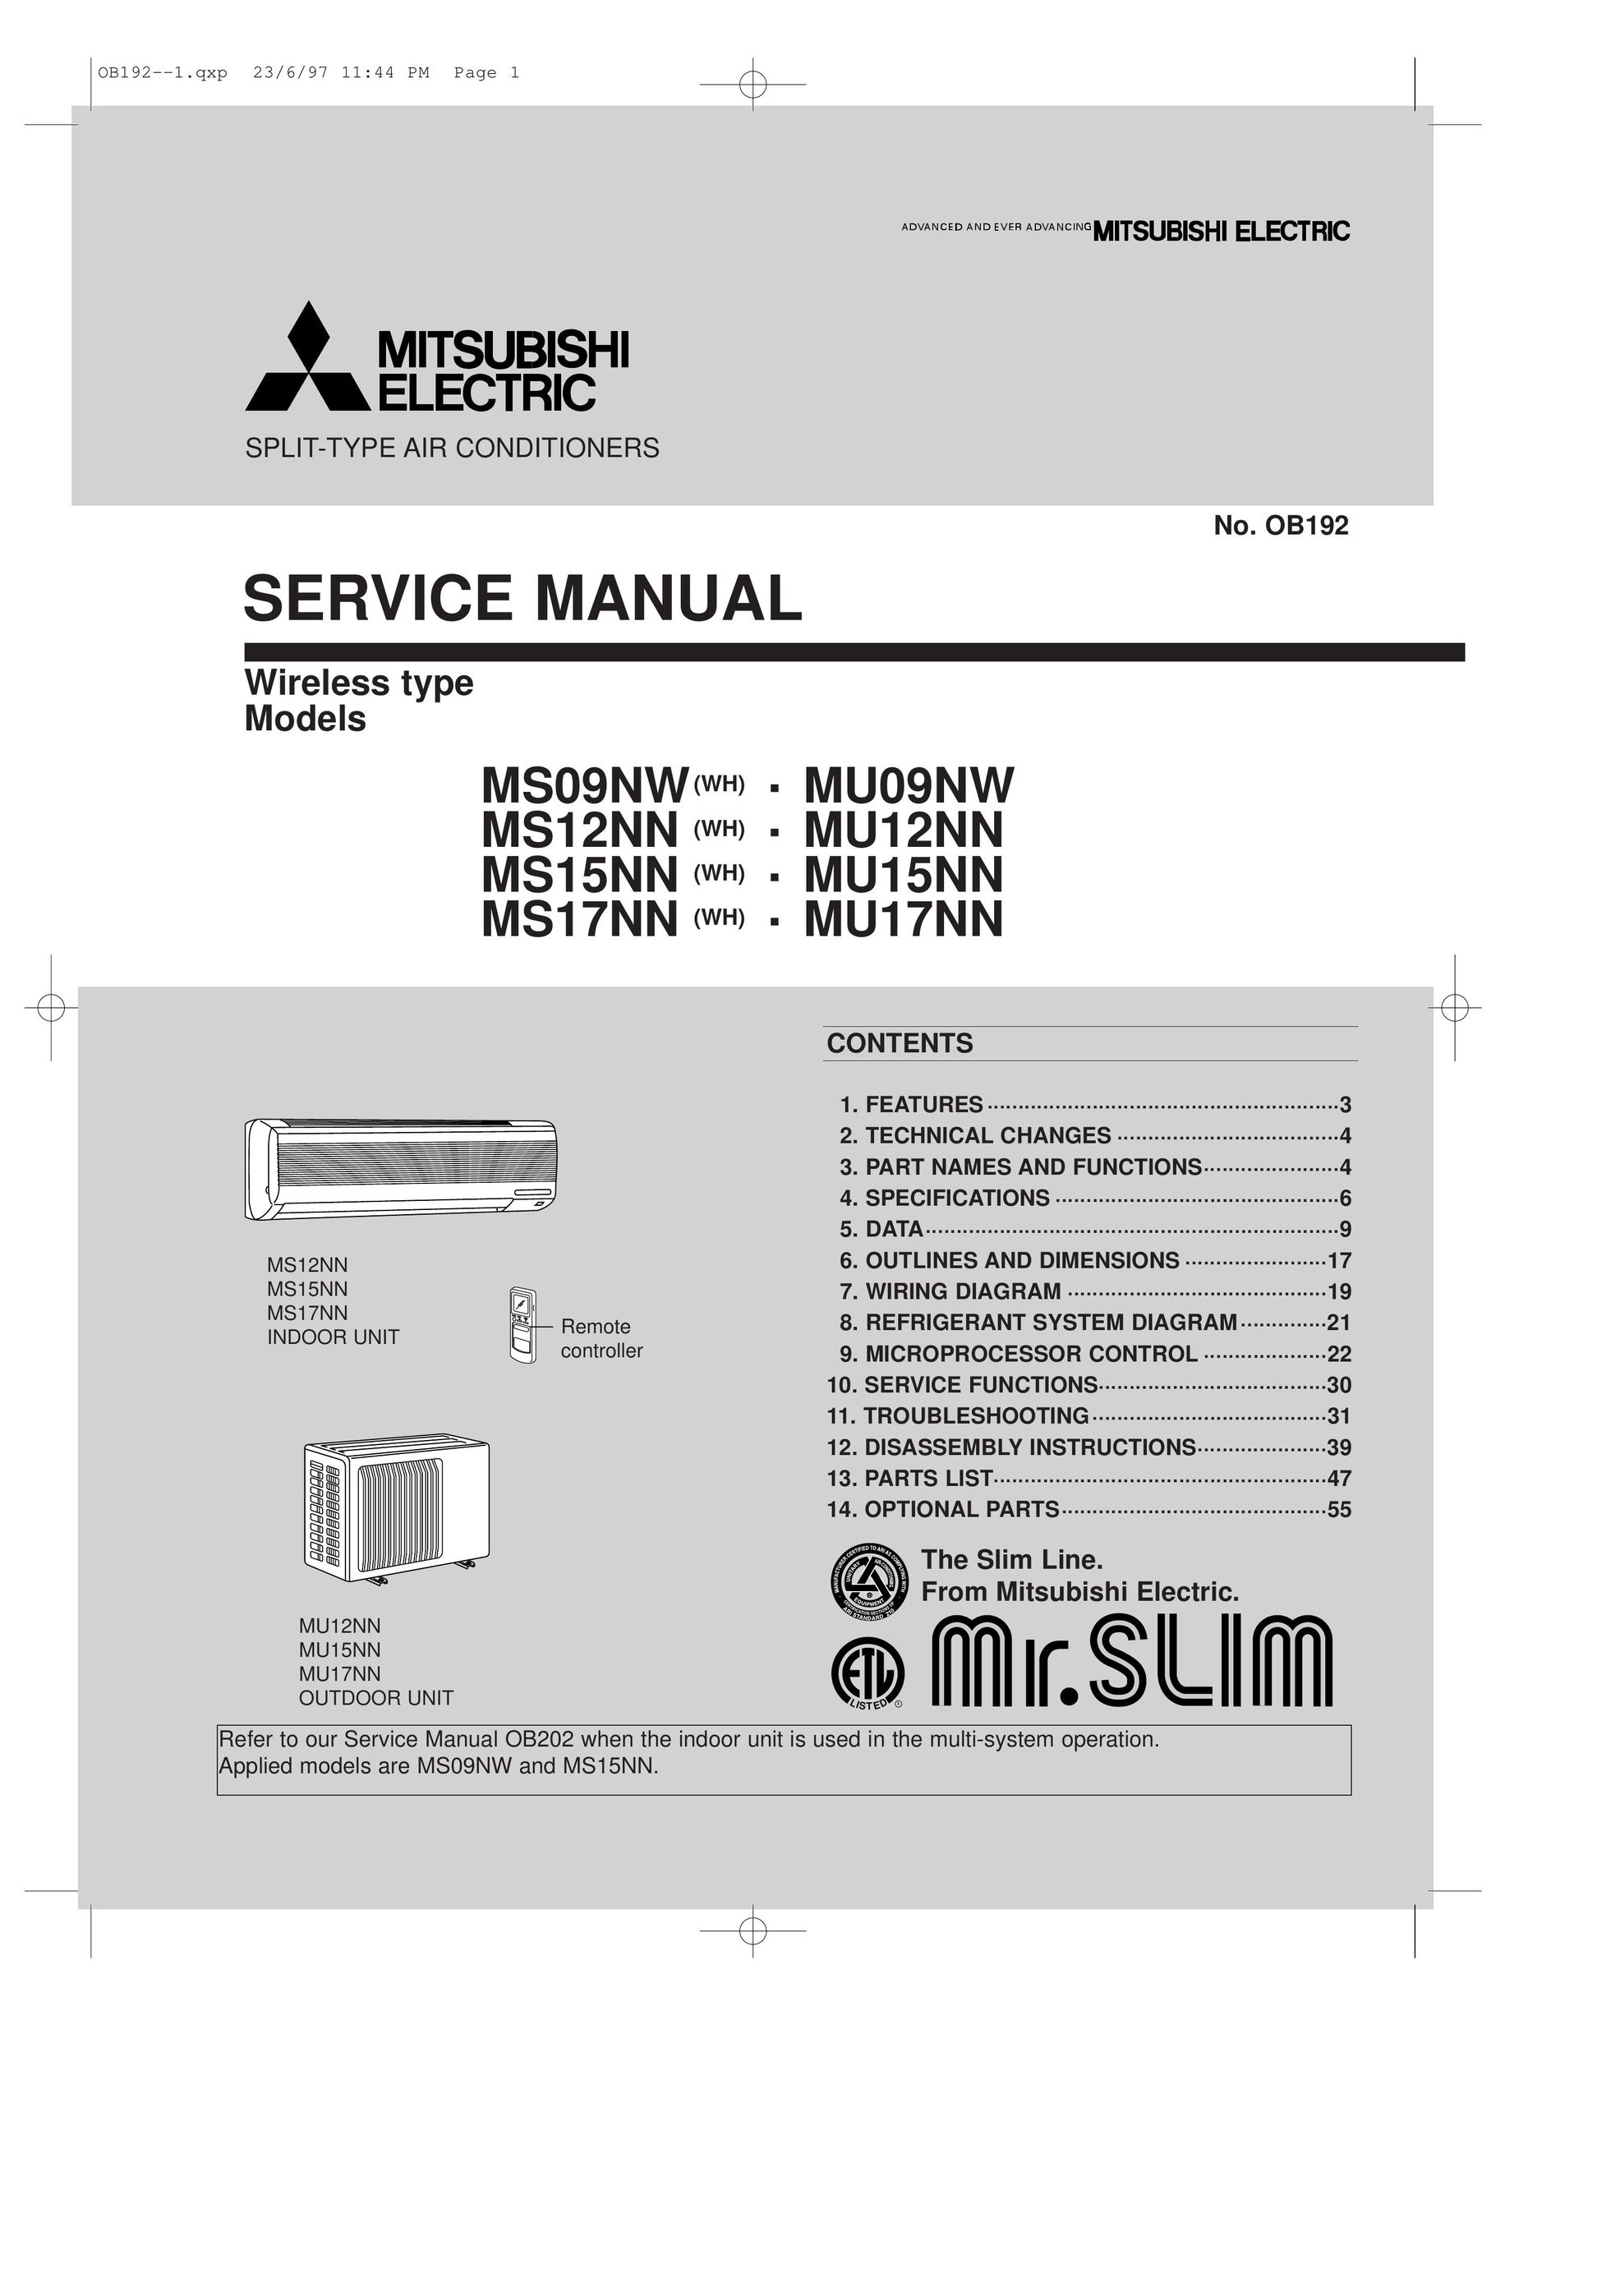 Mitsumi electronic MS12NN (WH) Air Conditioner User Manual